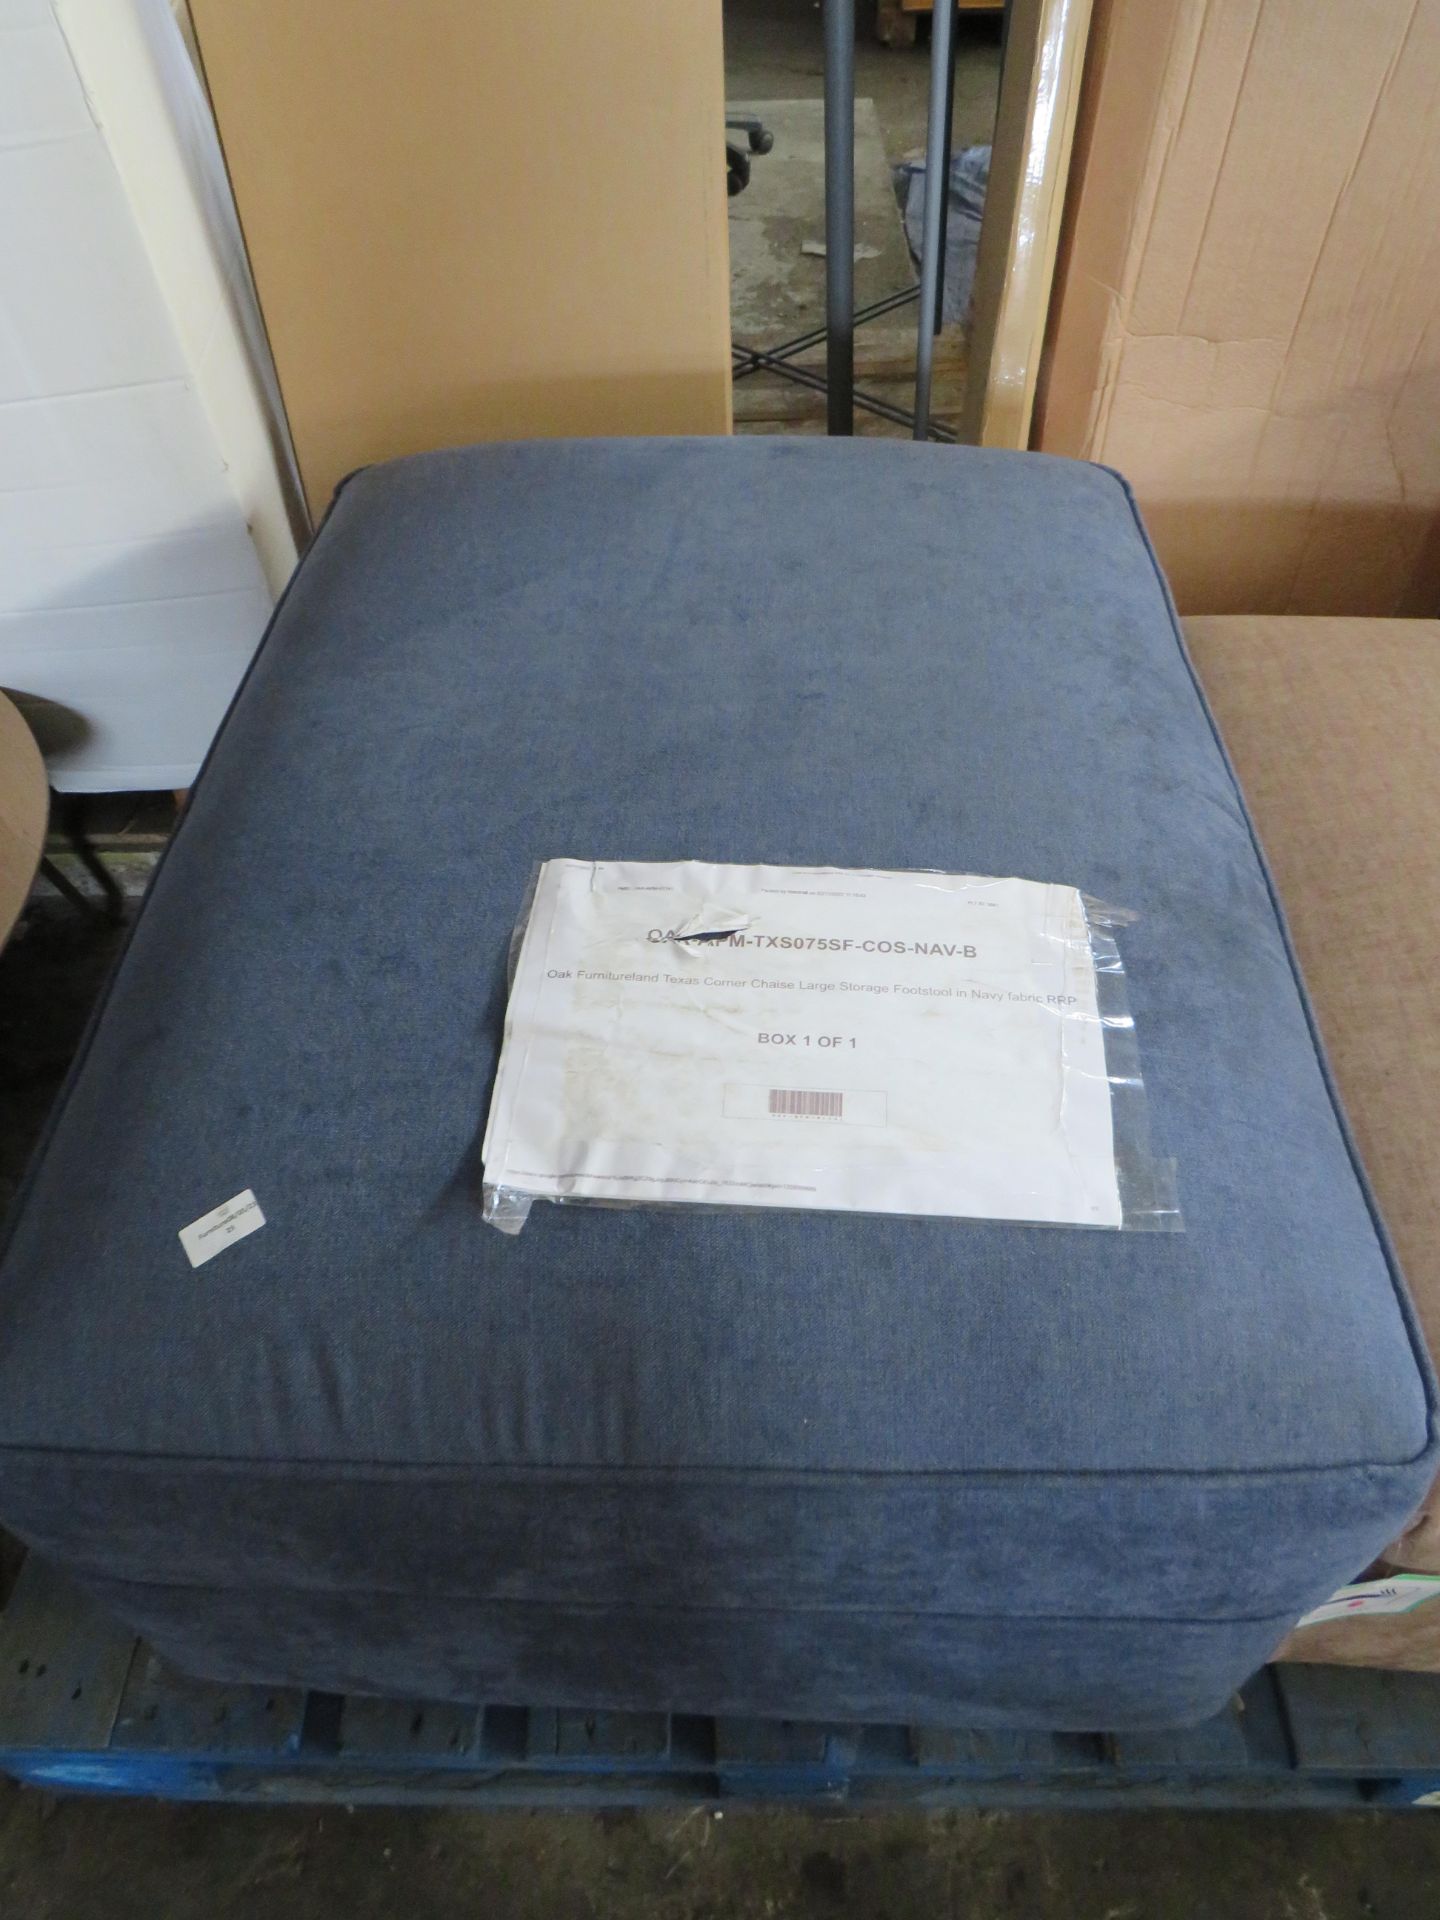 Oak Furnitureland Texas Corner Chaise Large Storage Footstool in Navy fabric RRP 479.99 Our Texas